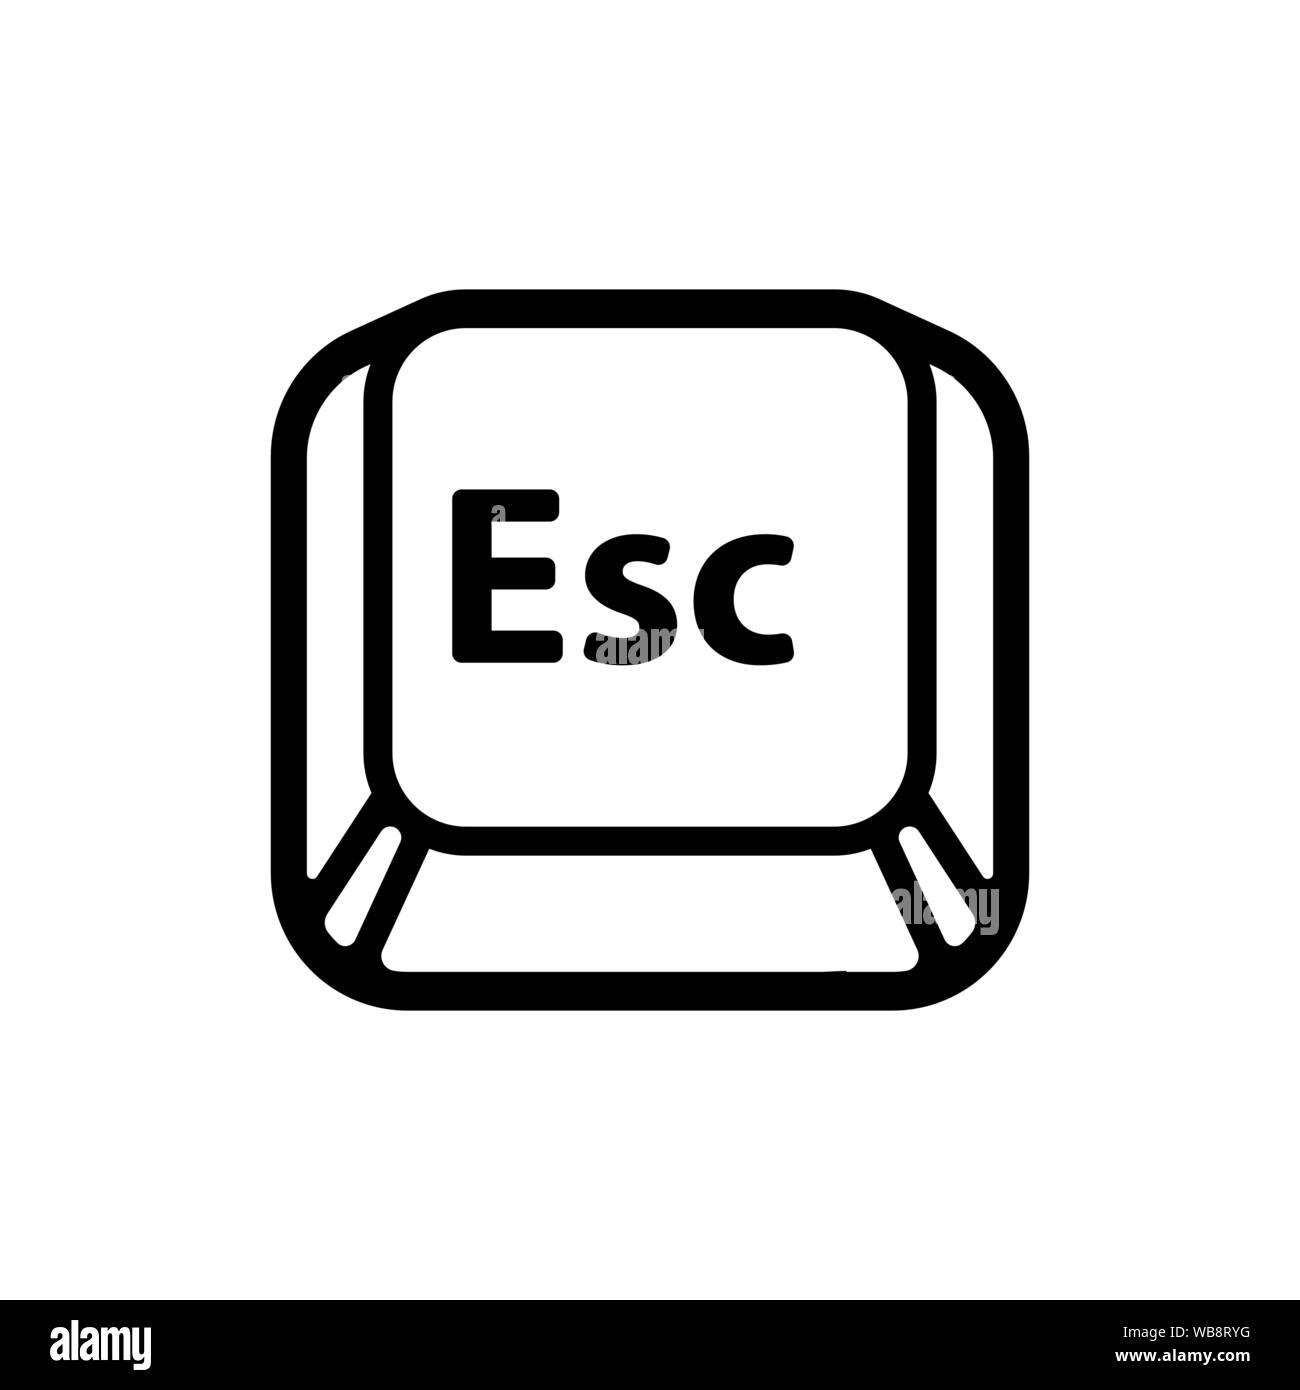 Esc (Escape) key icon. Keyboard button symbol, black and white outline drawing. Isolated vector illustration. Stock Vector